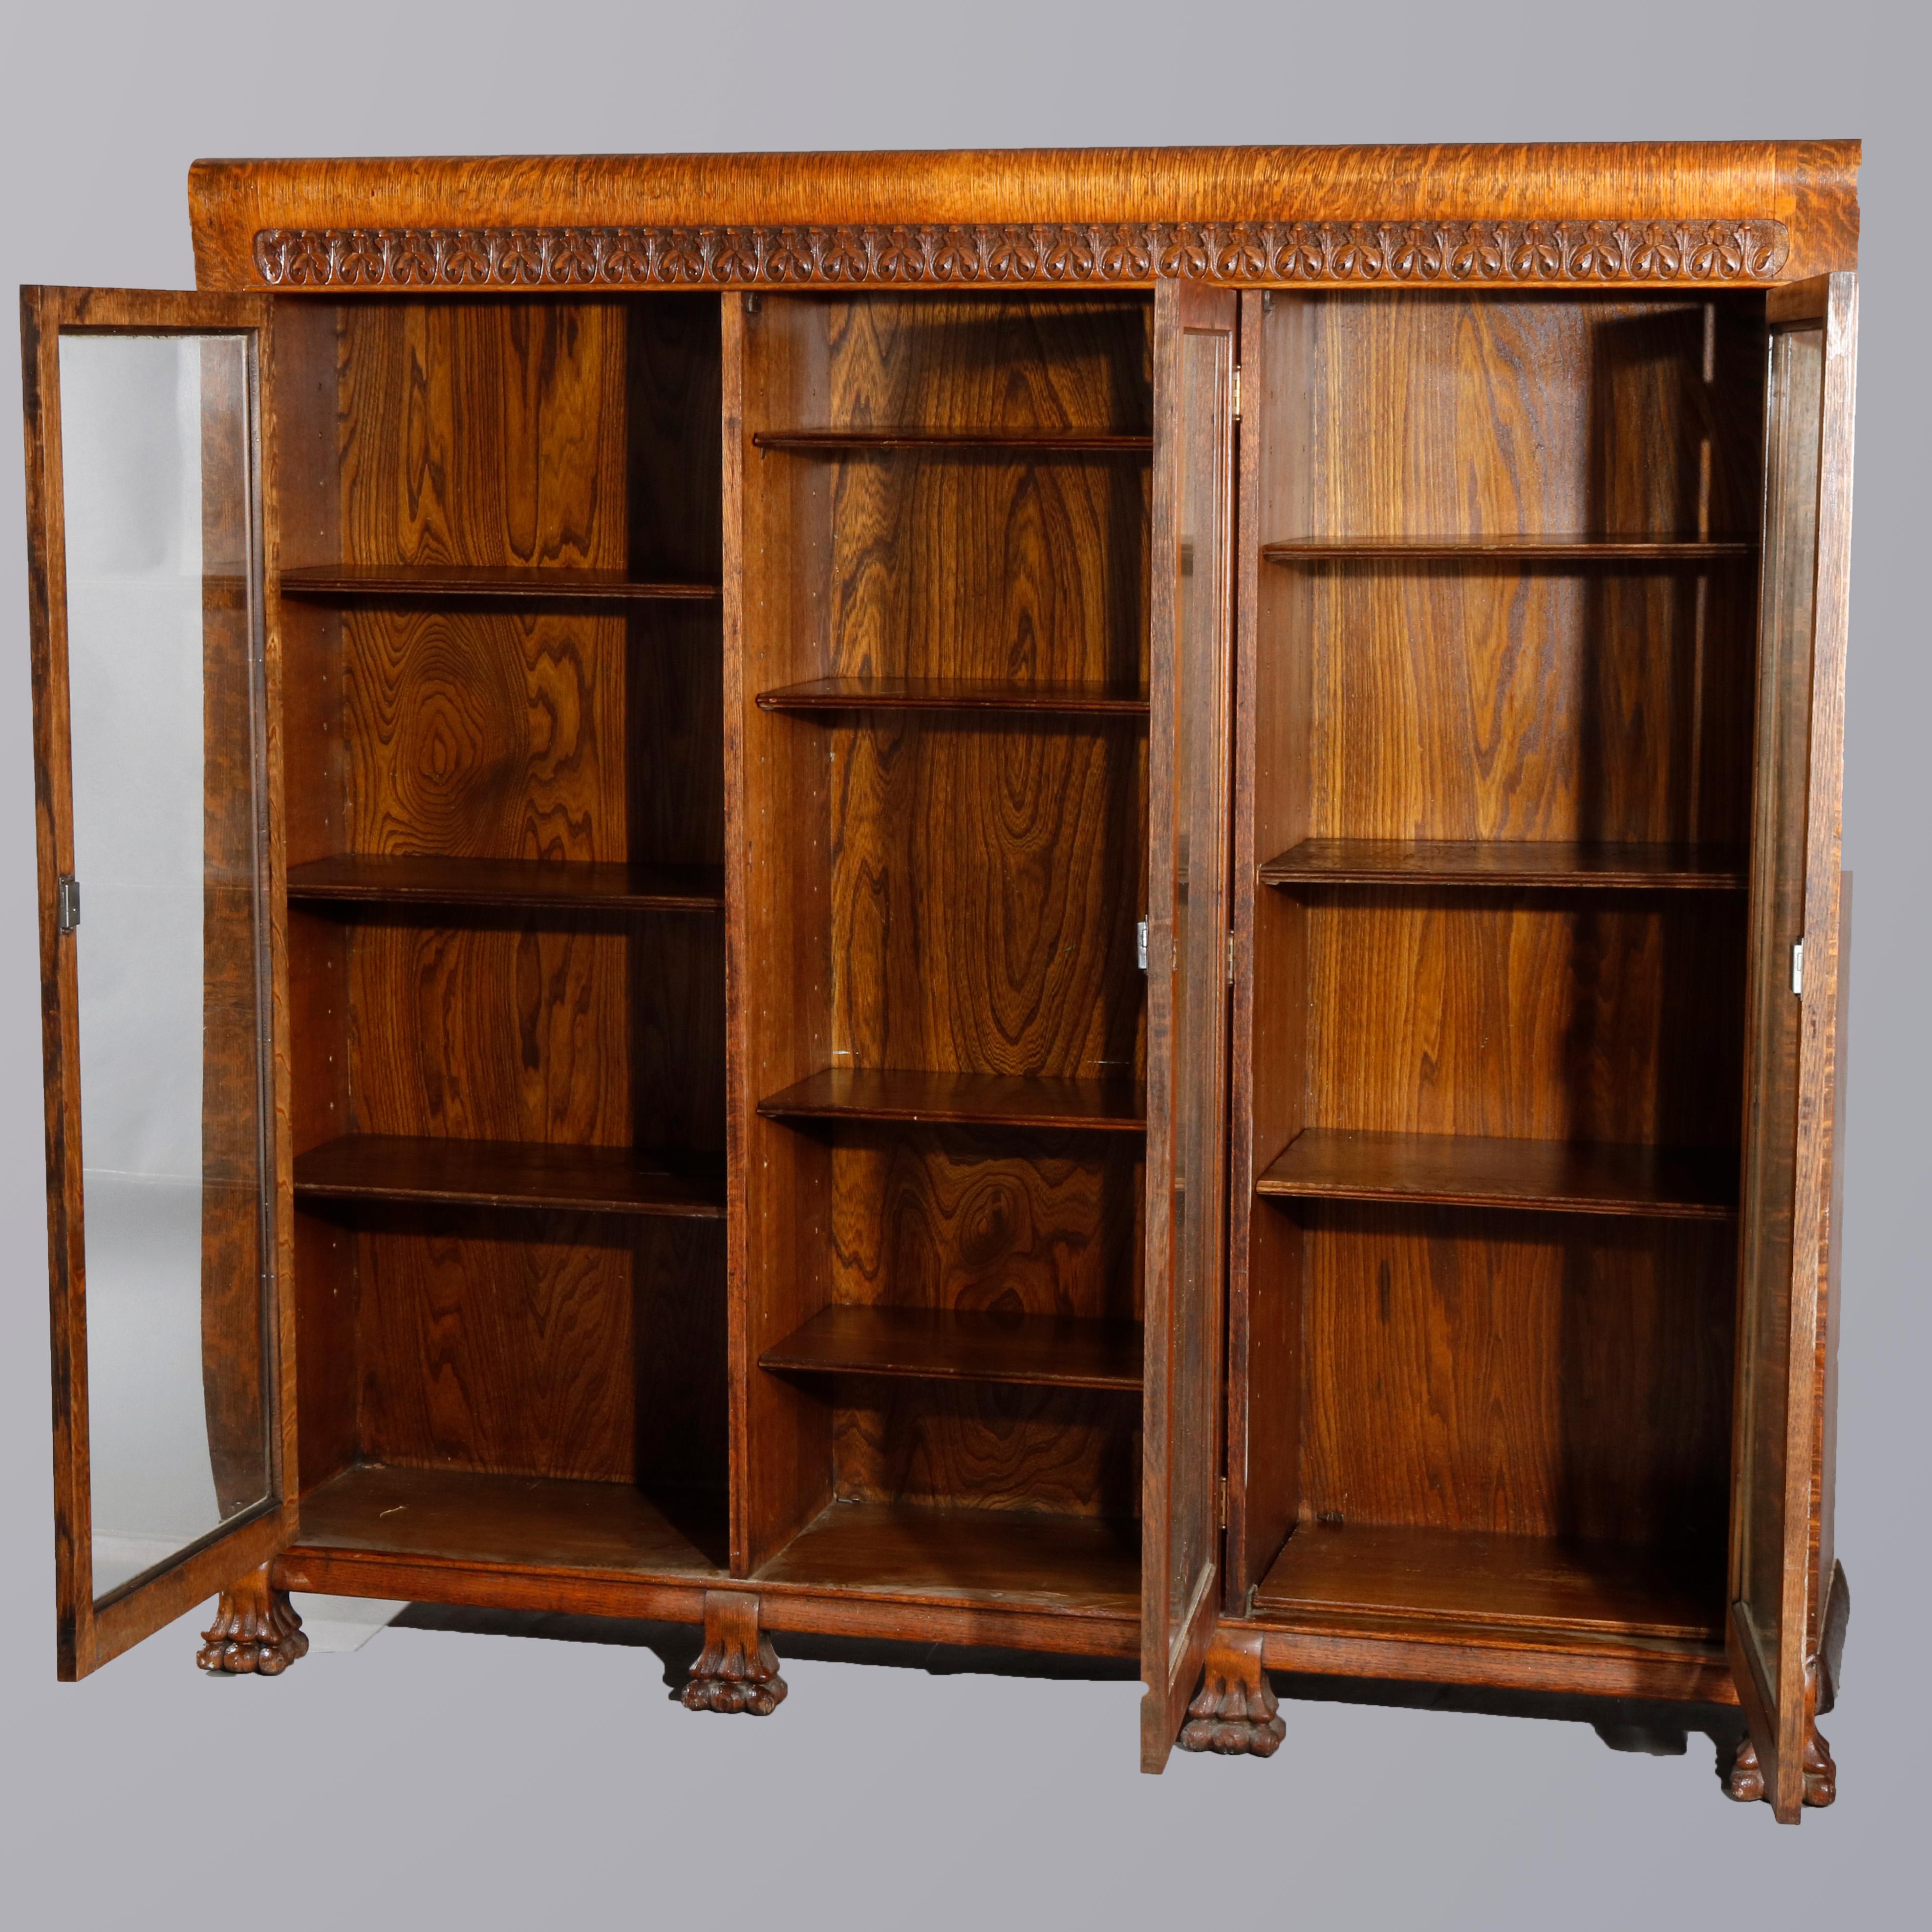 An antique RJ Horner bookcase offers quarter sawn oak construction with carved frieze surmounting triple glass doors opening to shelved interior and raised on carved paw feet, circa 1900.

Measures: 60